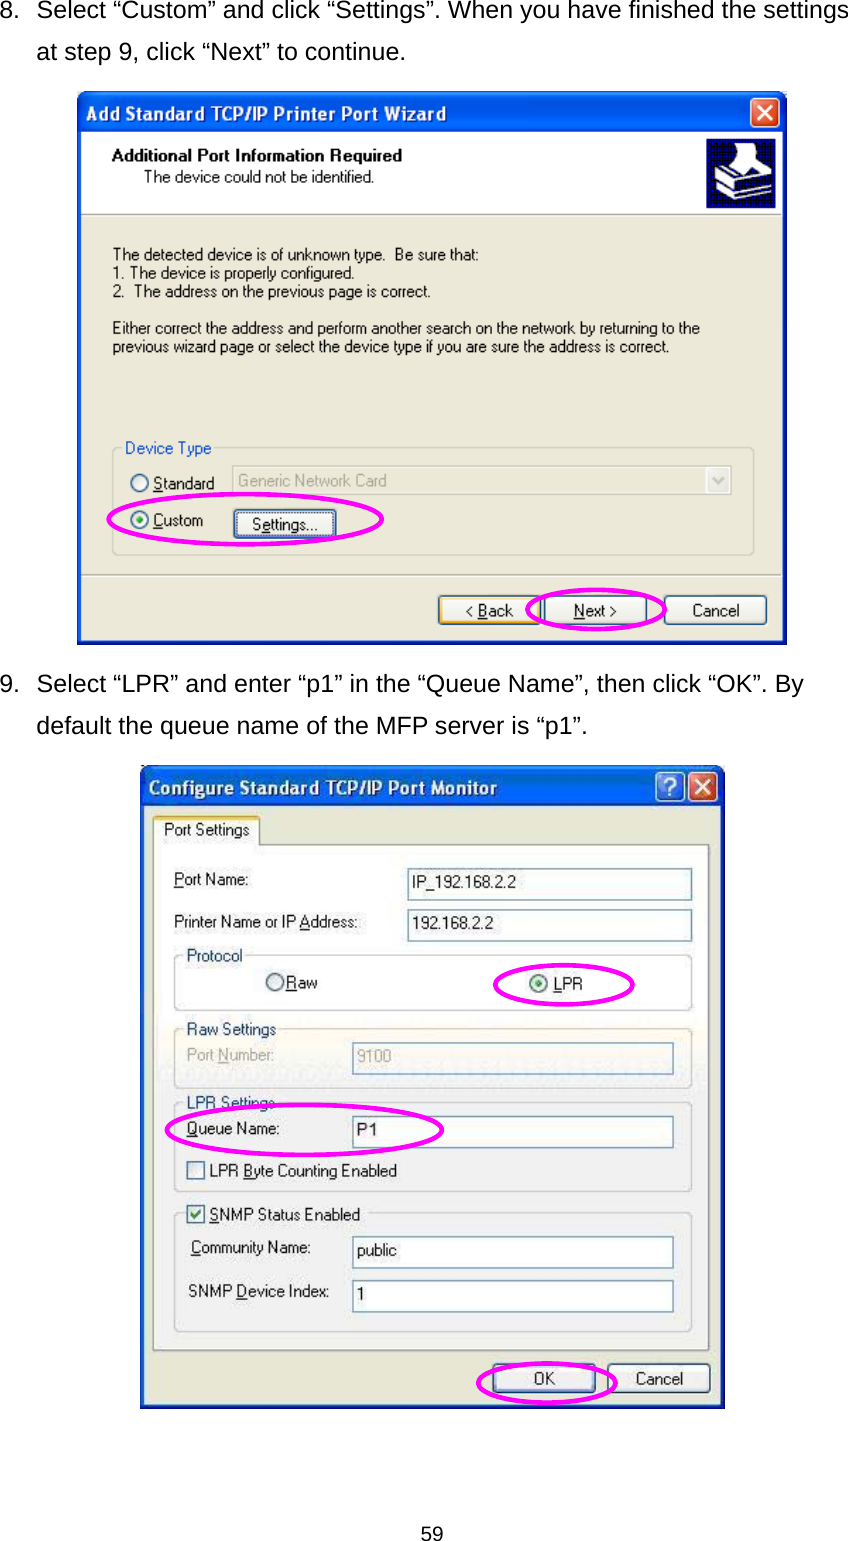 59 8.  Select “Custom” and click “Settings”. When you have finished the settings at step 9, click “Next” to continue.  9.  Select “LPR” and enter “p1” in the “Queue Name”, then click “OK”. By default the queue name of the MFP server is “p1”.  